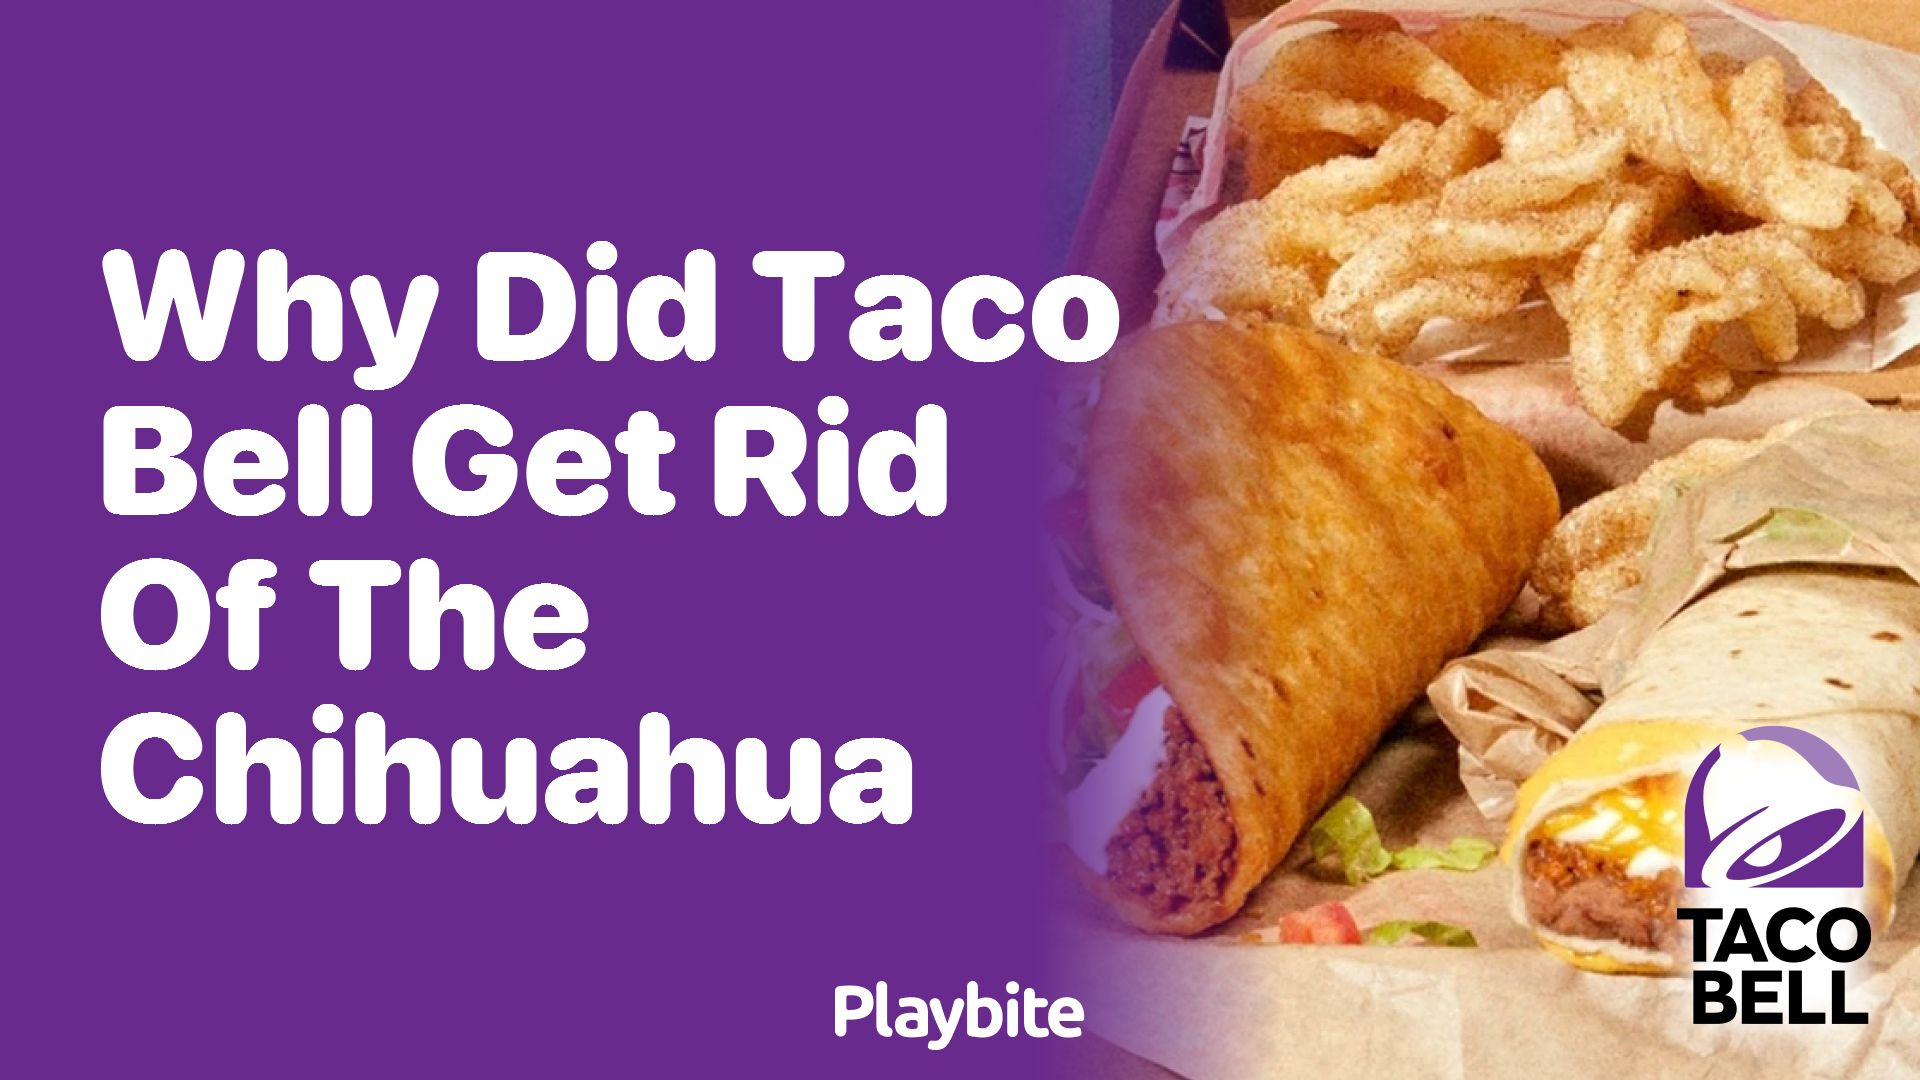 Why Did Taco Bell Get Rid of the Chihuahua?